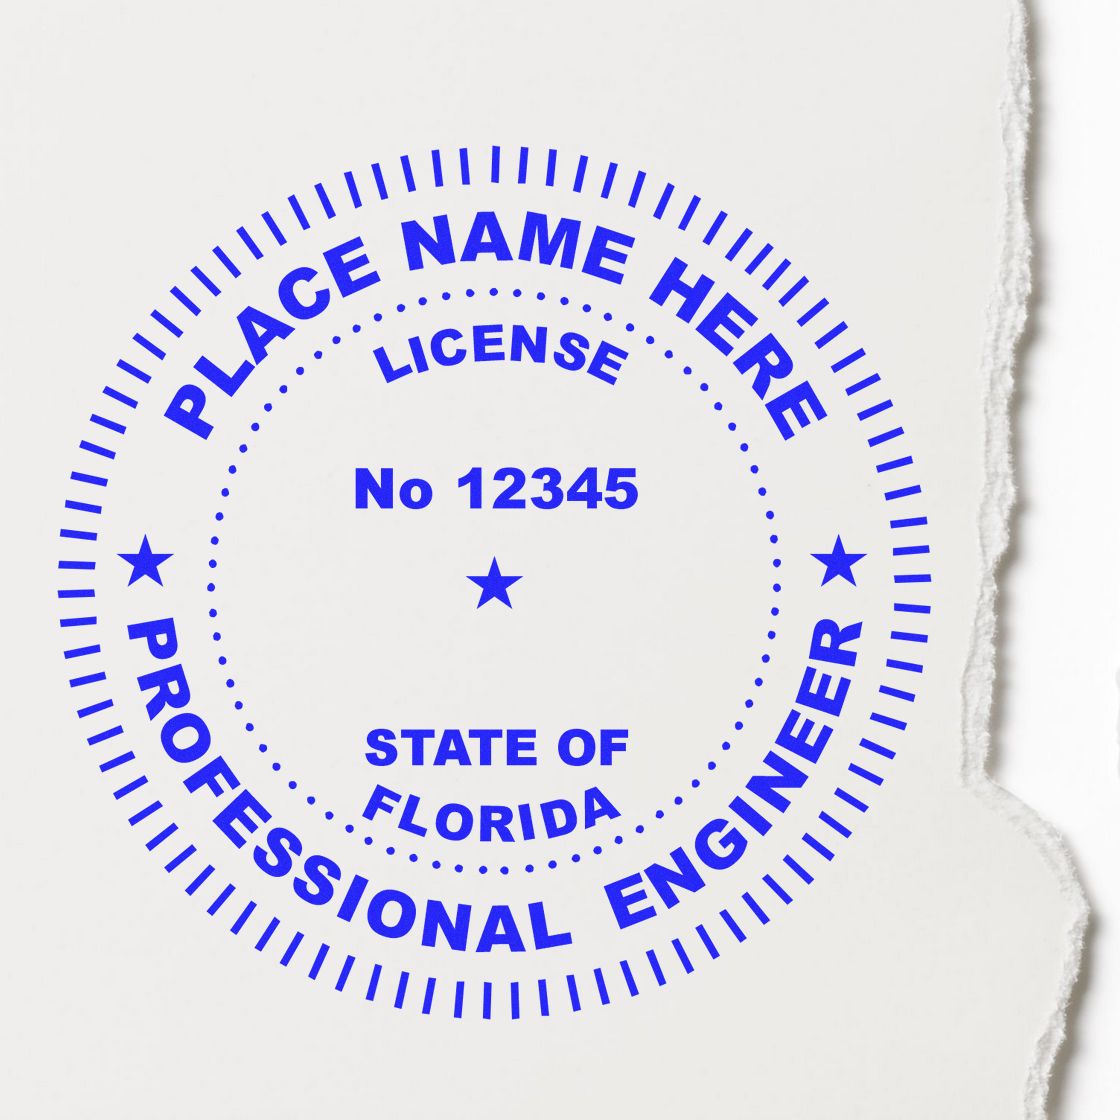 The Digital Florida PE Stamp and Electronic Seal for Florida Engineer stamp impression comes to life with a crisp, detailed photo on paper - showcasing true professional quality.